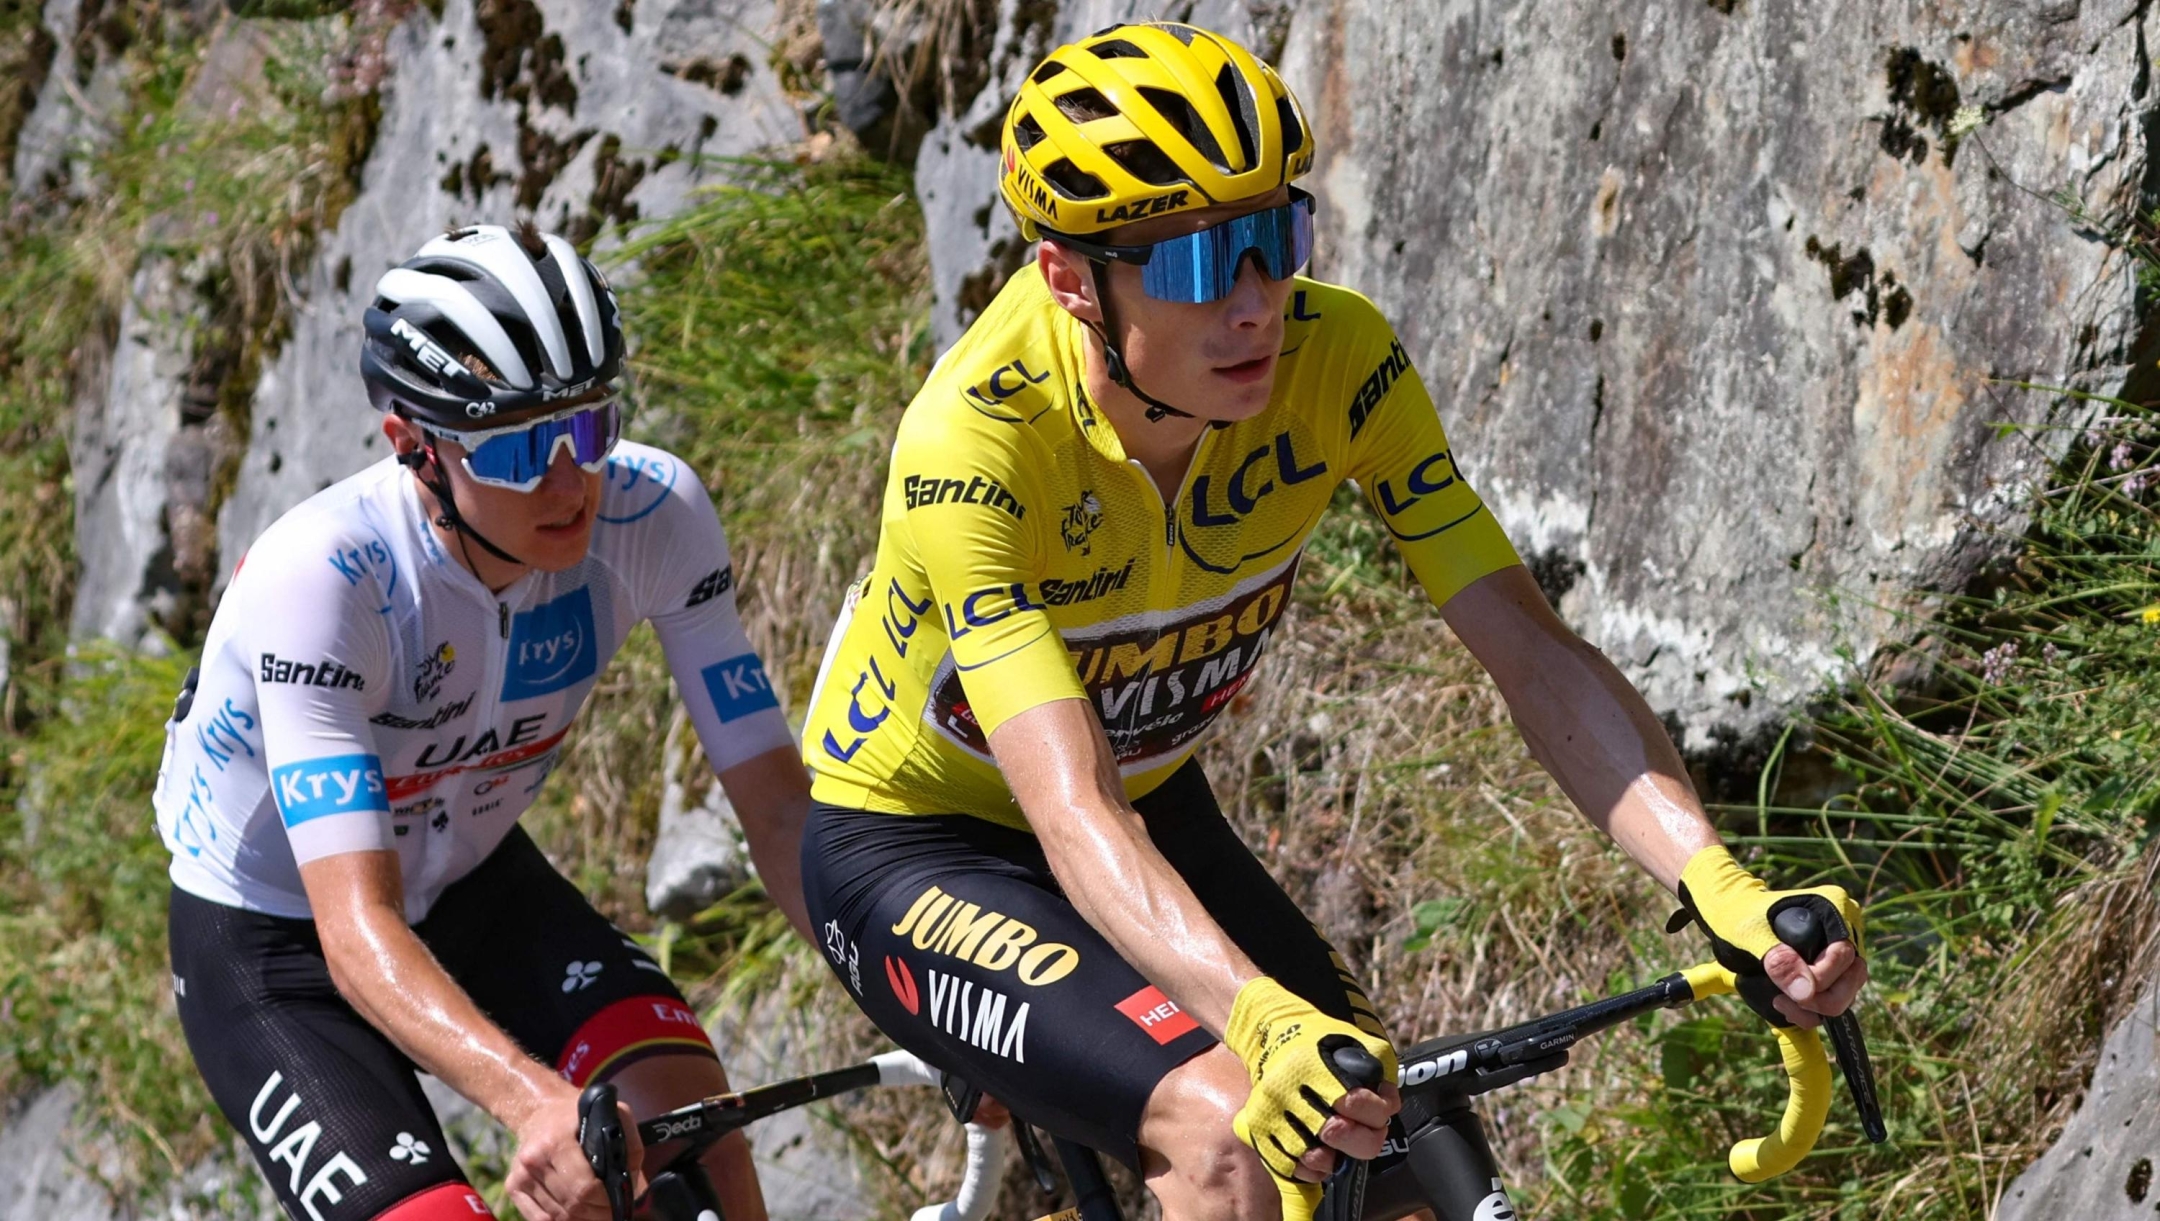 Jumbo-Visma team's Danish rider Jonas Vingegaard wearing the overall leader's yellow jersey (R) and UAE Team Emirates team's Slovenian rider Tadej Pogacar wearing the best young rider's white jersey (L) cycle with the pack of riders during the 18th stage of the 109th edition of the Tour de France cycling race, 143,2 km between Lourdes and Hautacam in the Pyrenees mountains in southwestern France, on July 21, 2022. (Photo by Thomas SAMSON / AFP)